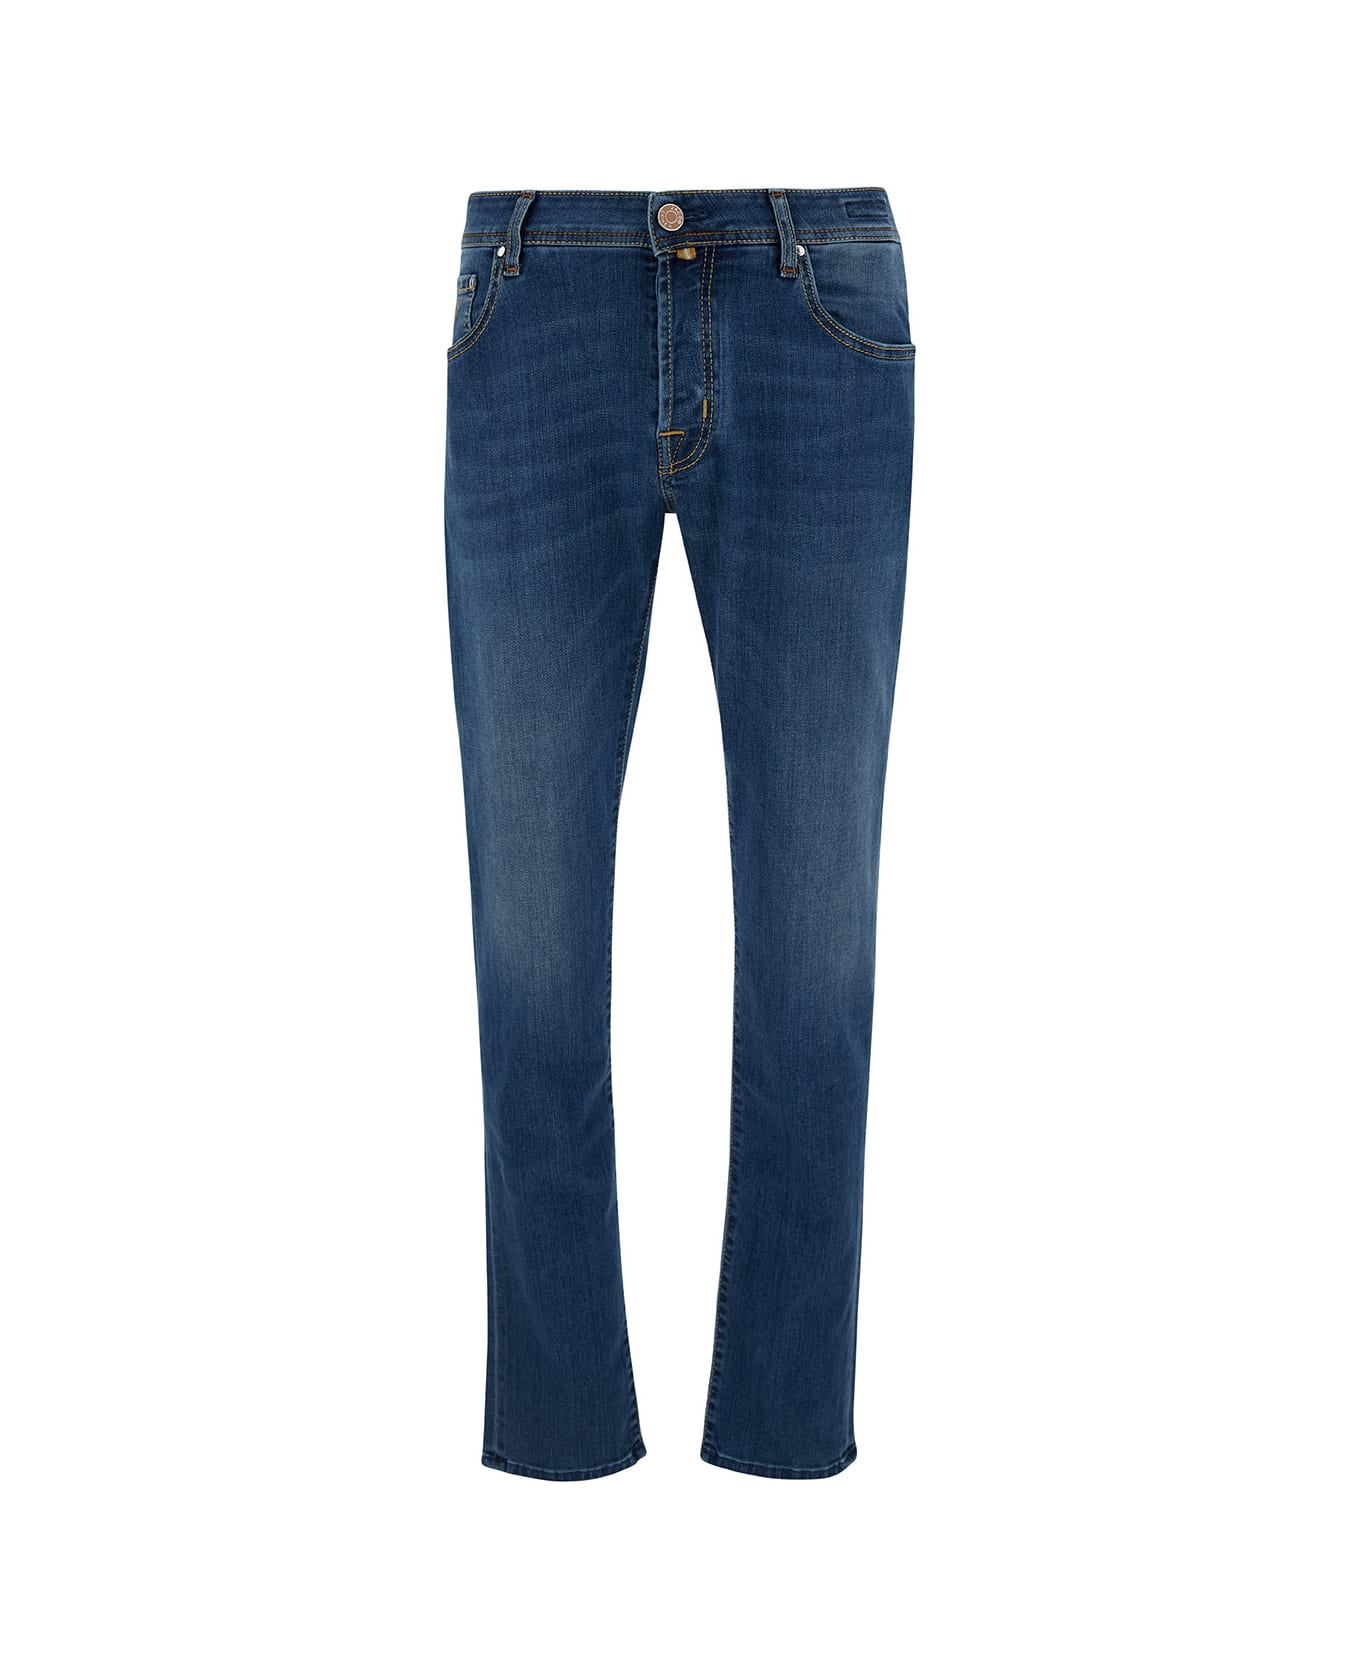 Jacob Cohen Blue Slim Low Waisted Jeans With Patch In Cotton Denim Man Jeans - DENIM MEDIO デニム